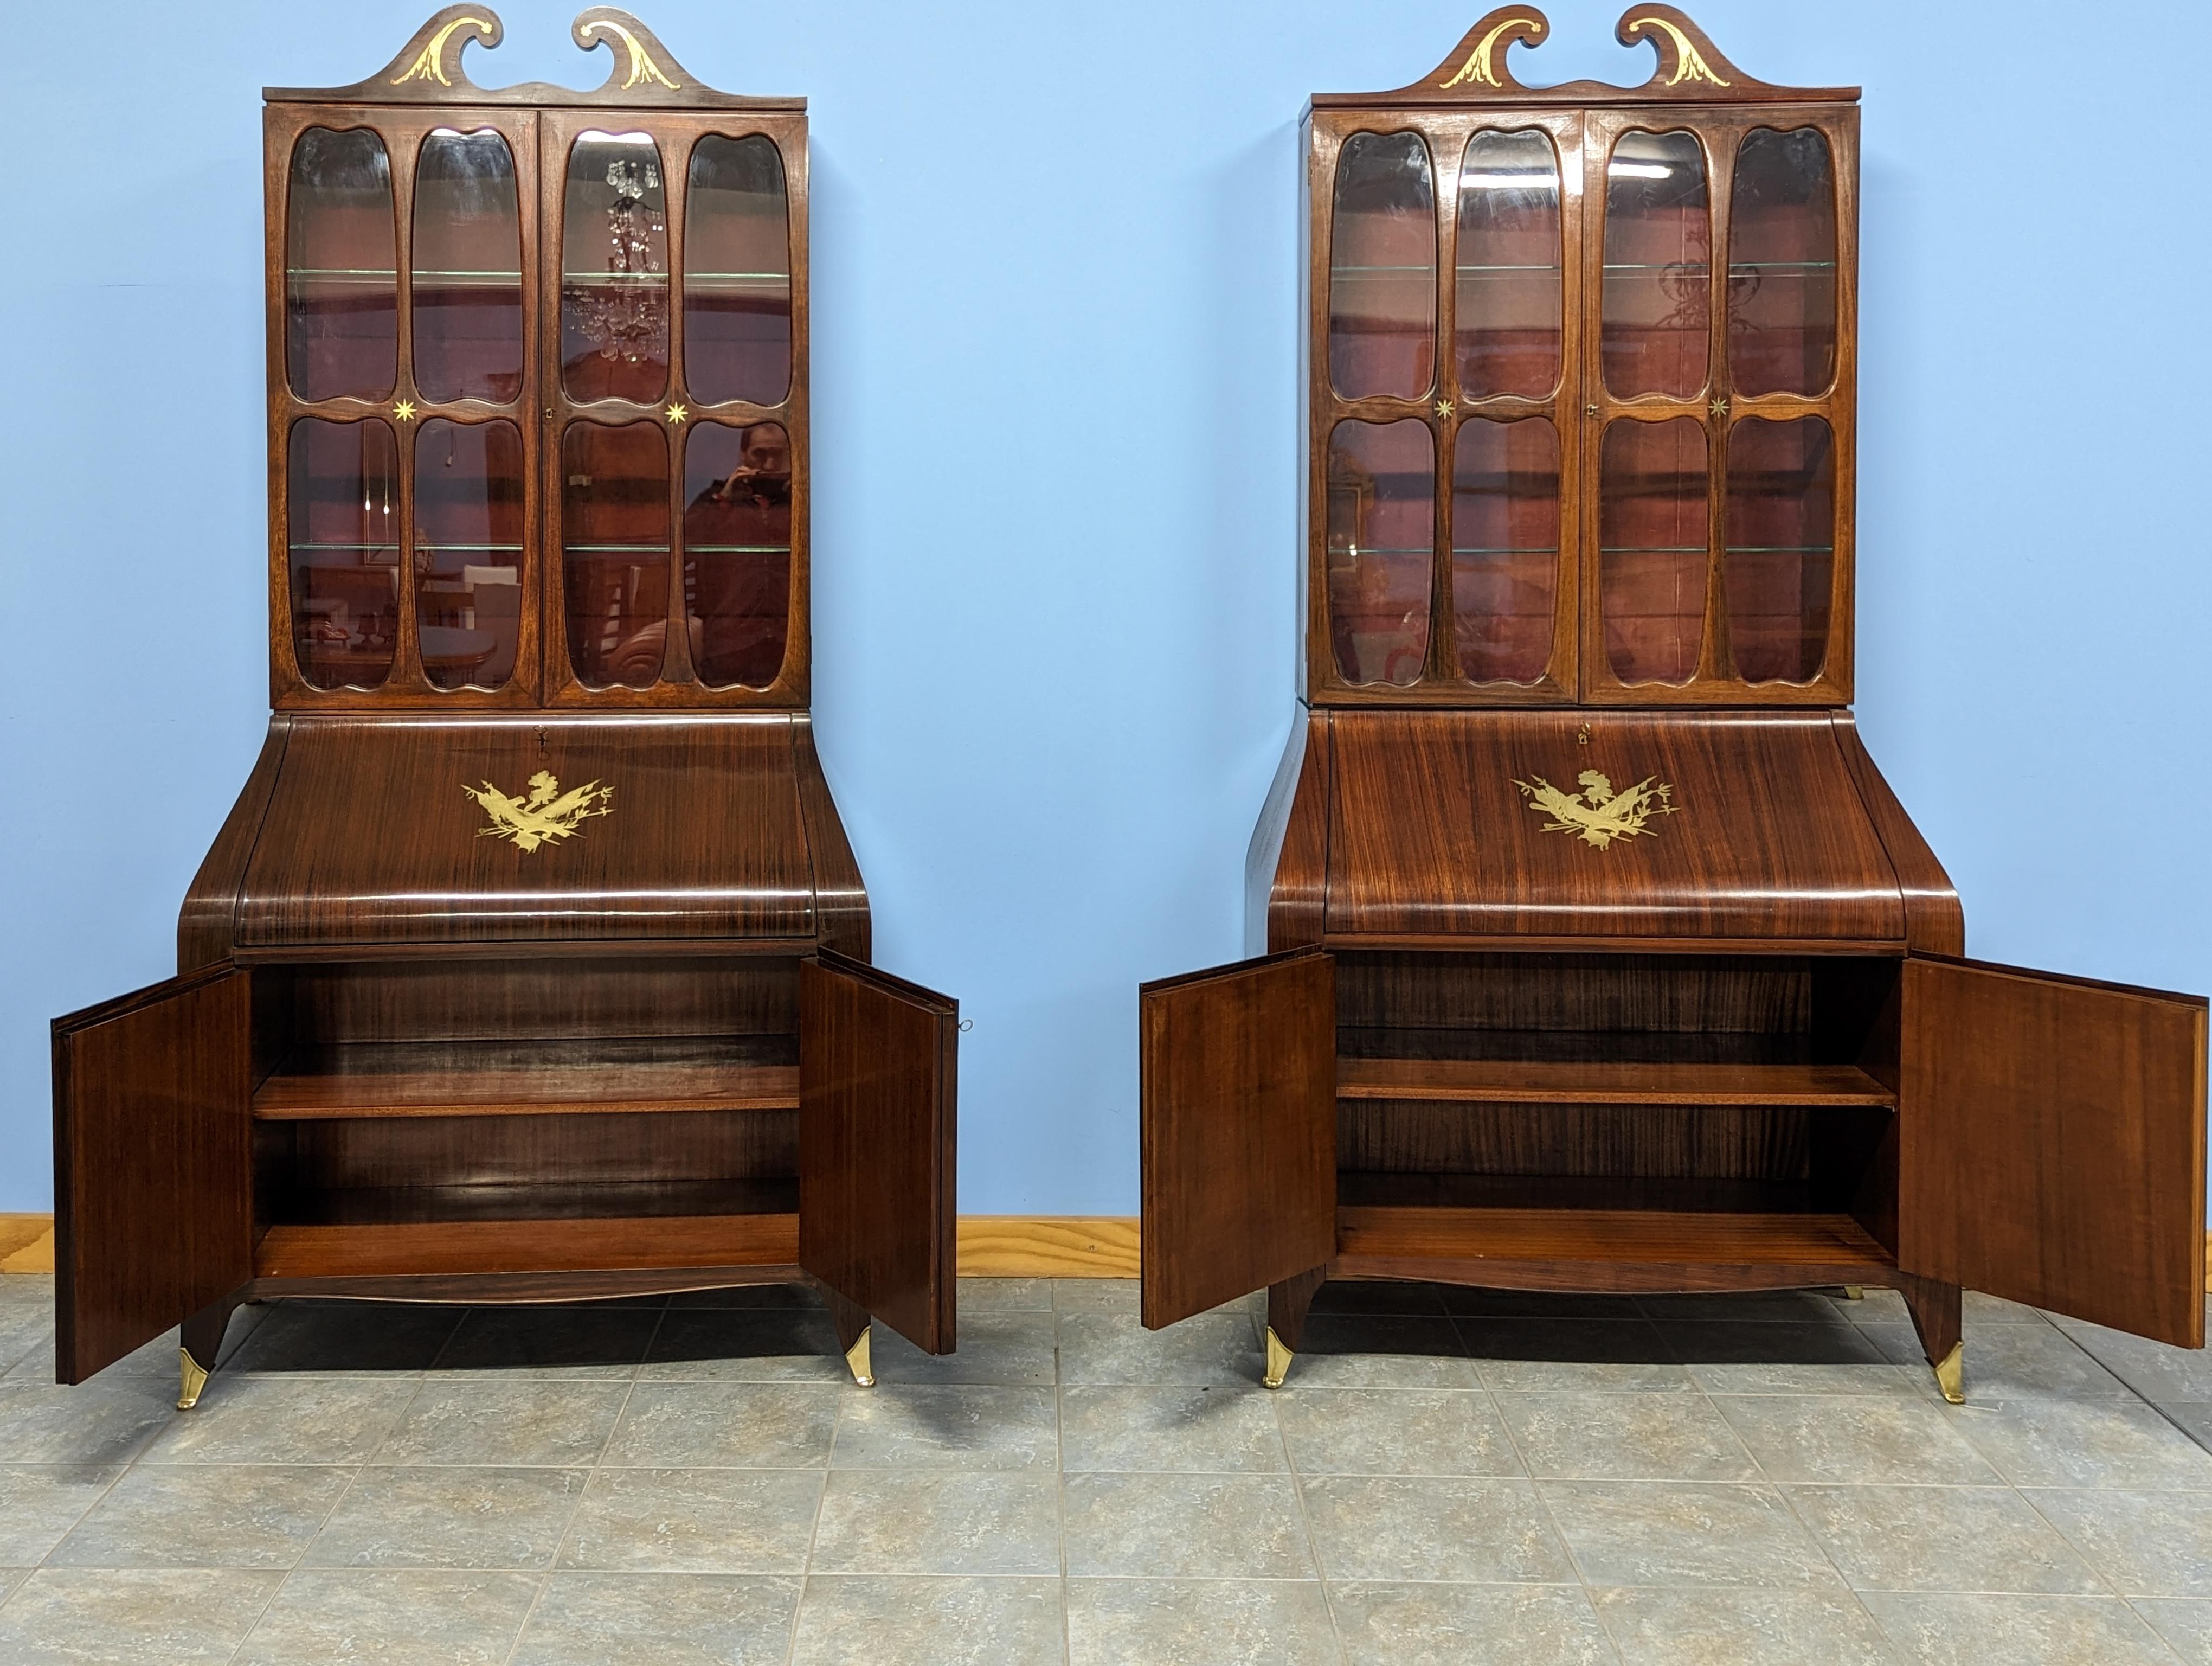 Pair of Trumeau Bookcases in Mahogany Designed by Paolo Buffa, 1950s For Sale 9